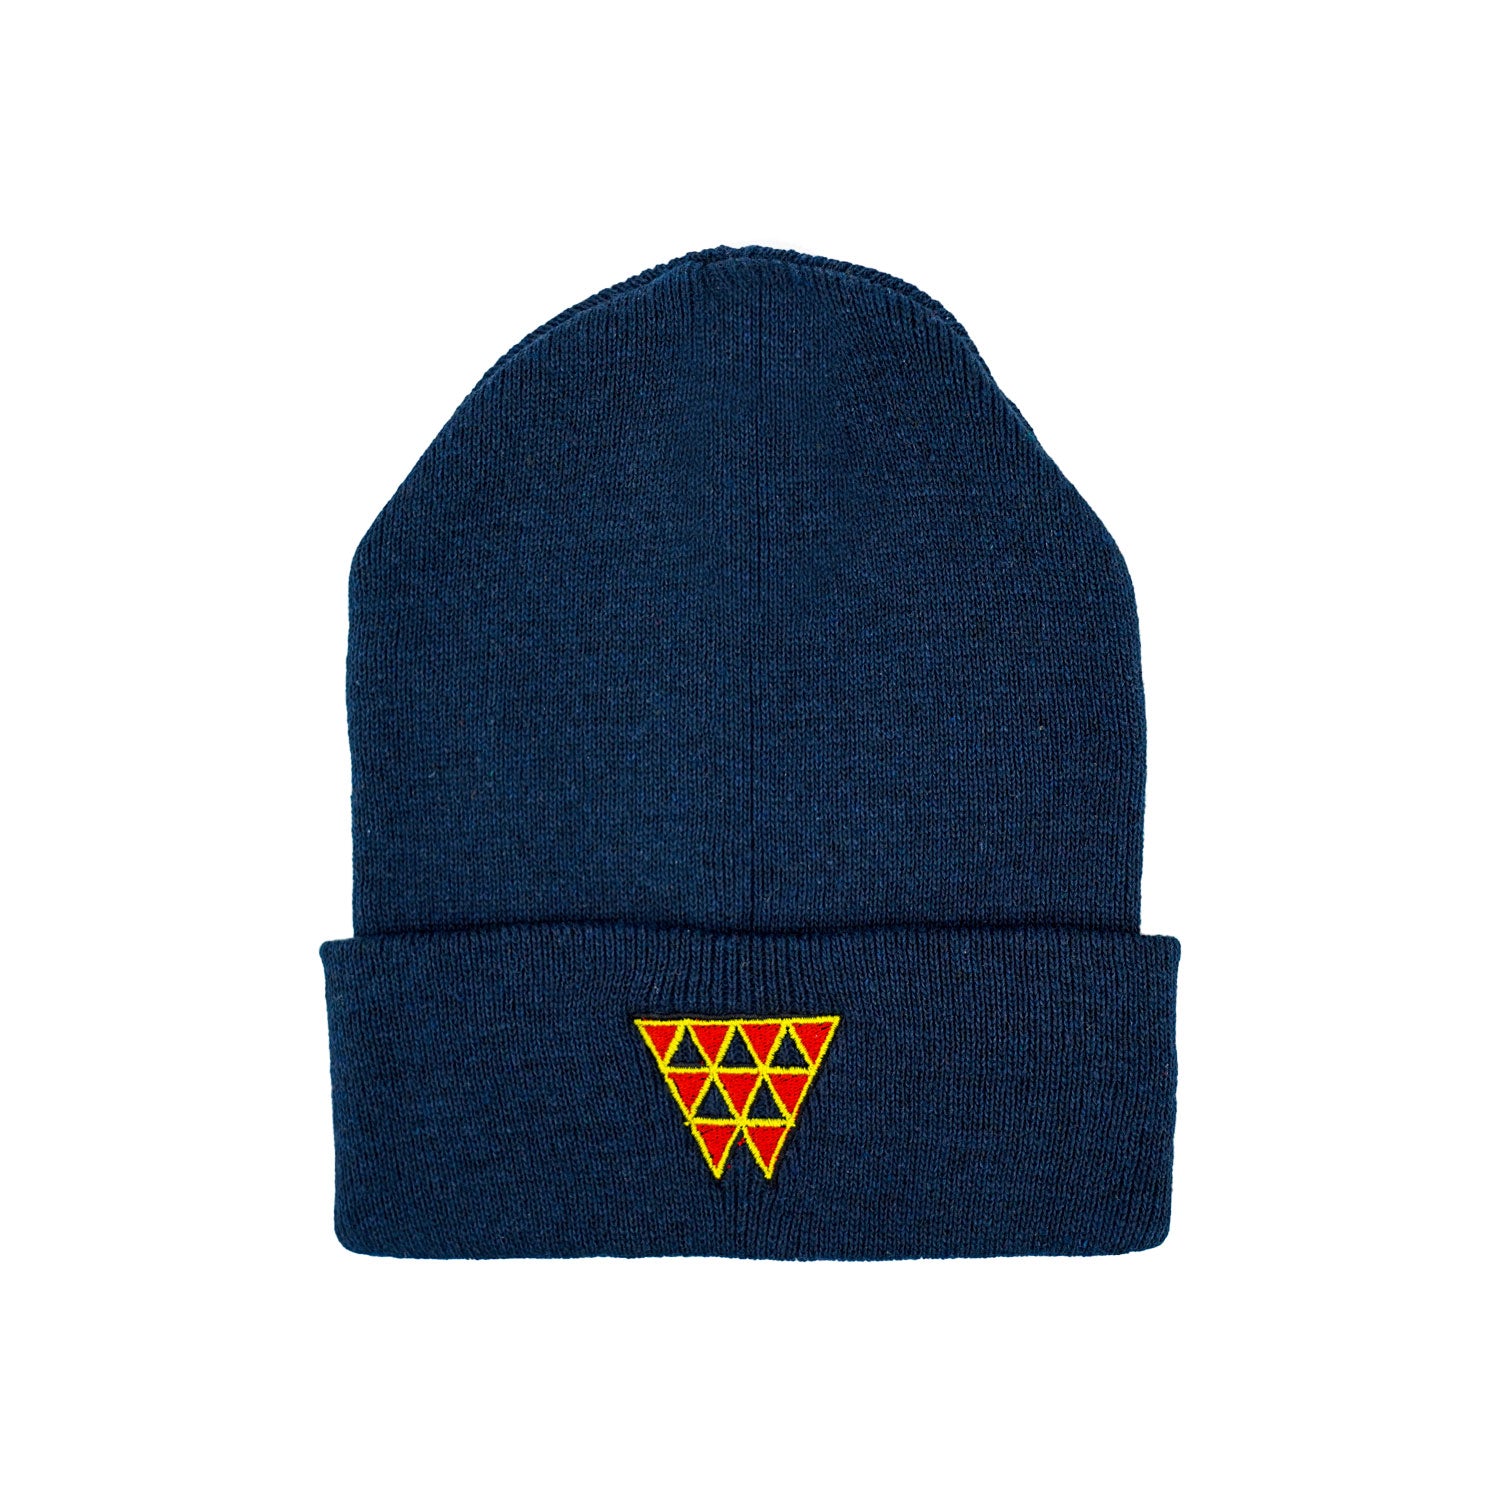 Red Triangle Knitted Cuff Beanie - Navy